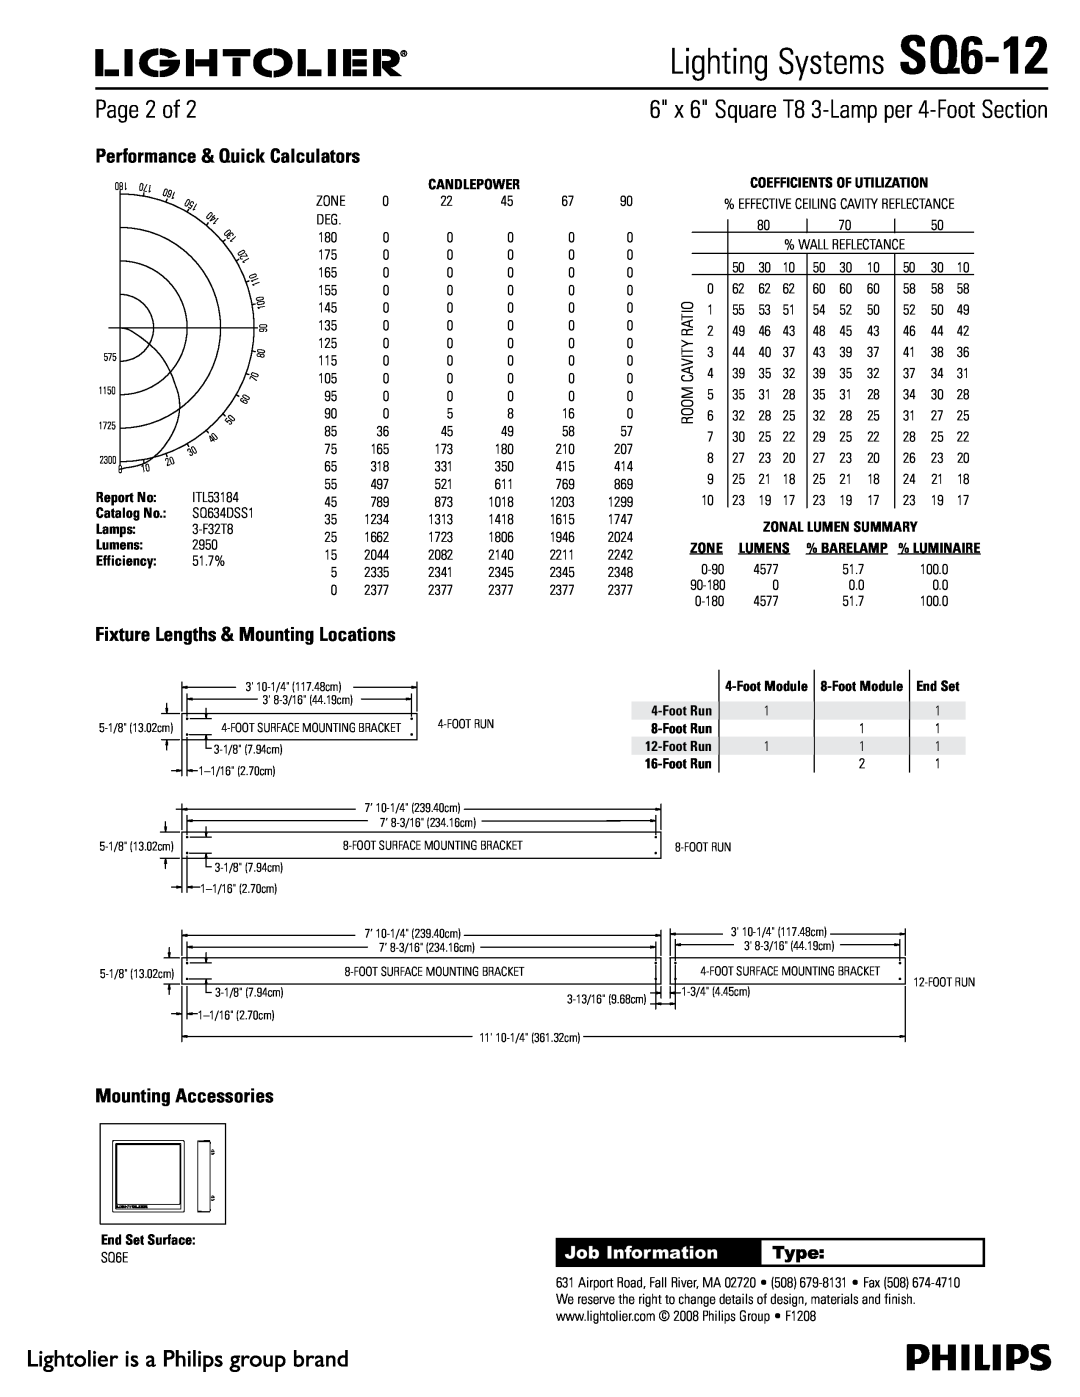 Lightolier SQ6-12 manual Performance & Quick Calculators, Fixture Lengths & Mounting Locations, Mounting Accessories, Type 